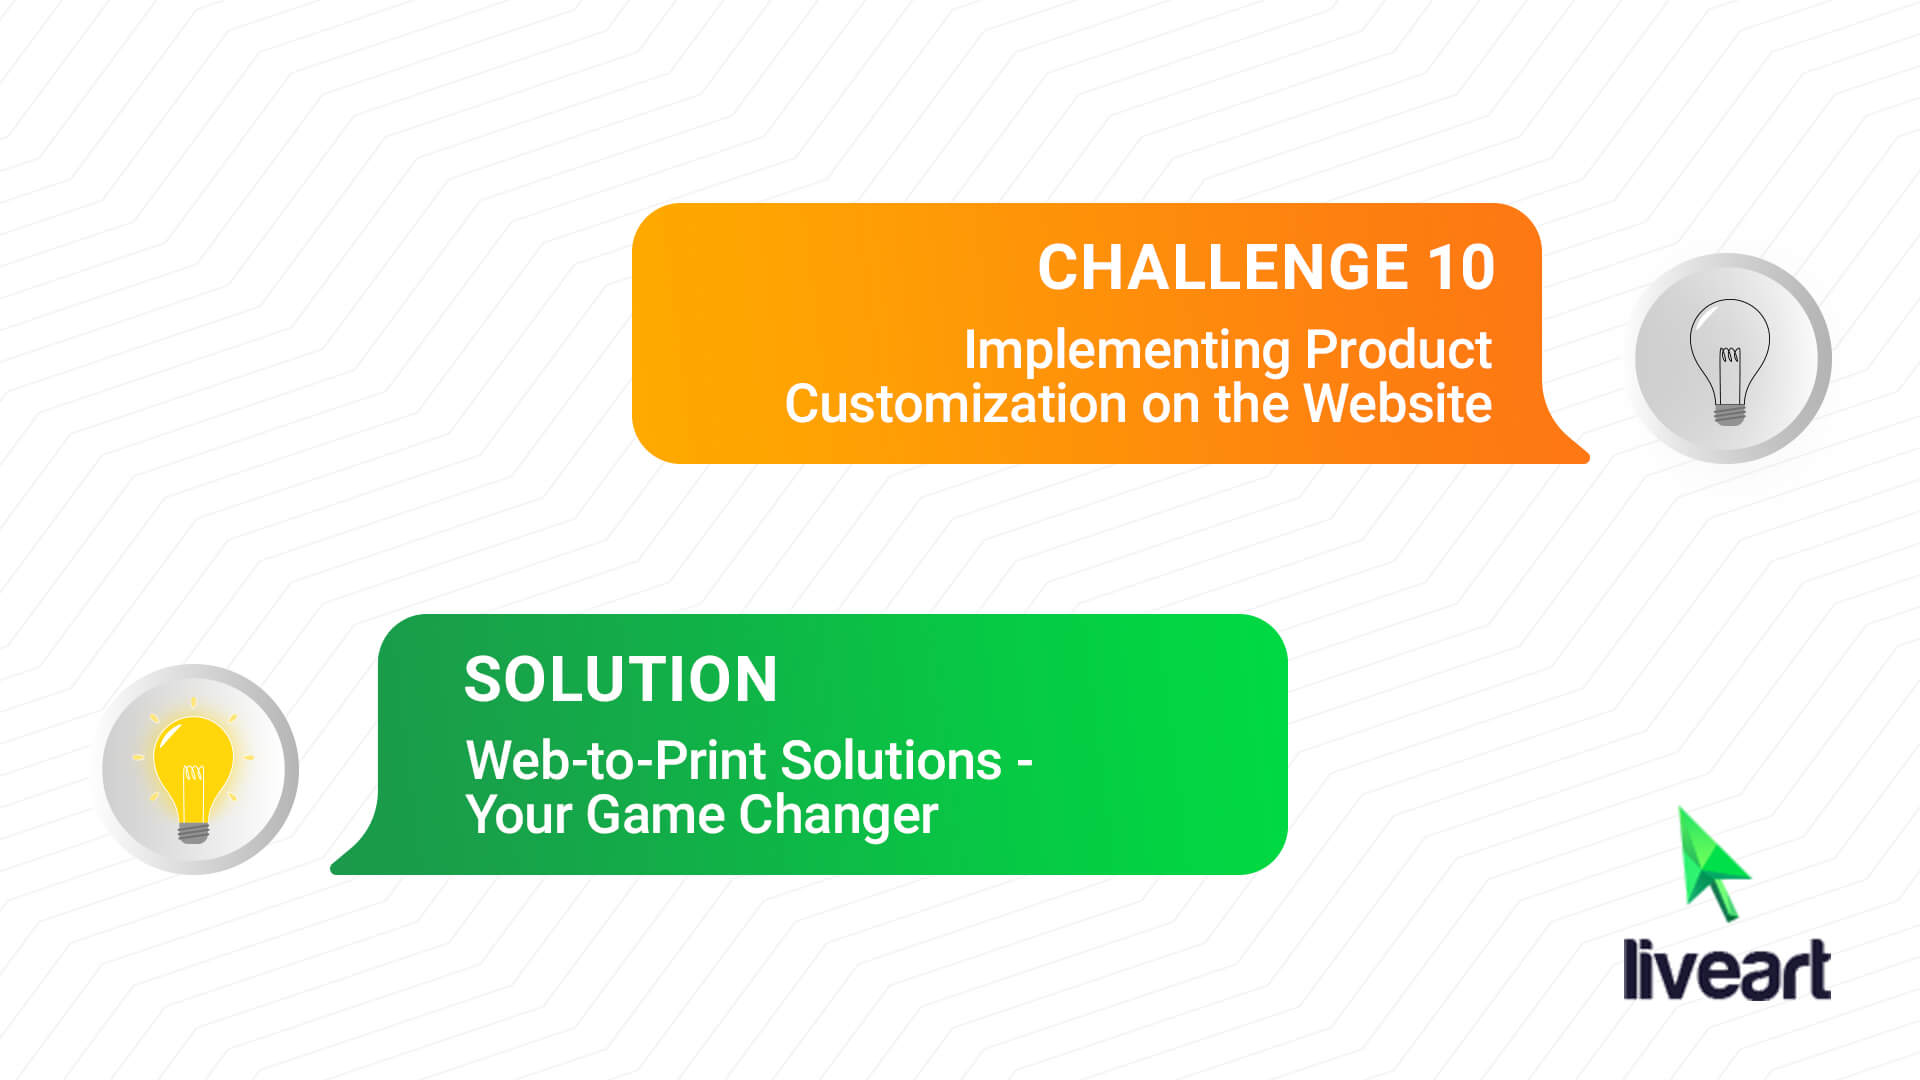 Challenge 10: Implementing Product Customization on the Website